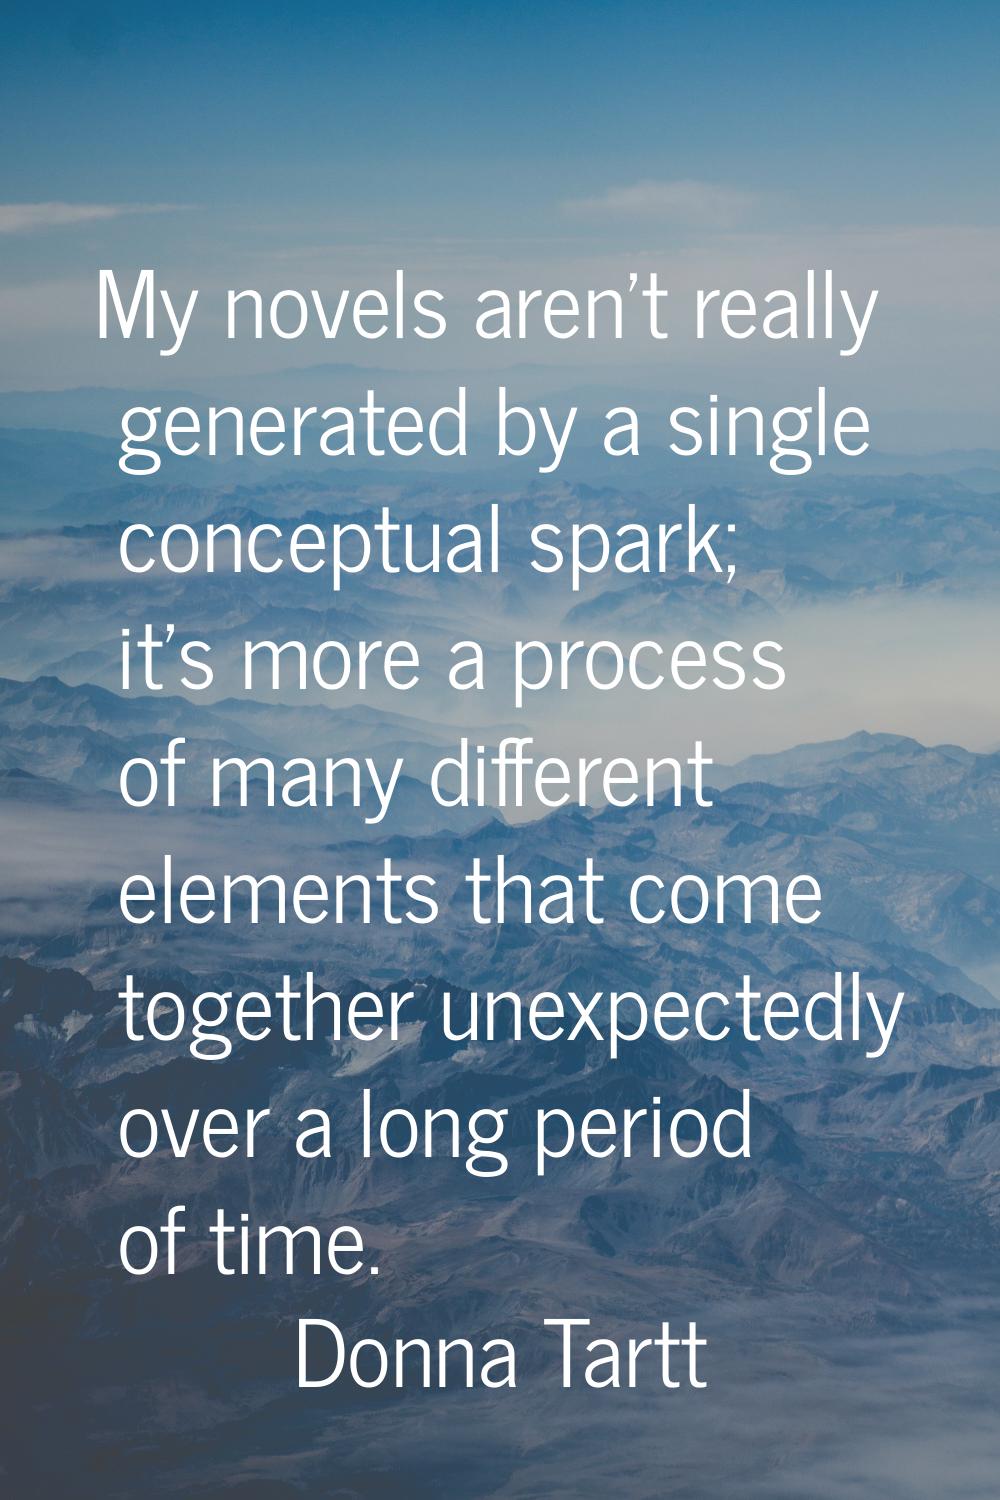 My novels aren't really generated by a single conceptual spark; it's more a process of many differe